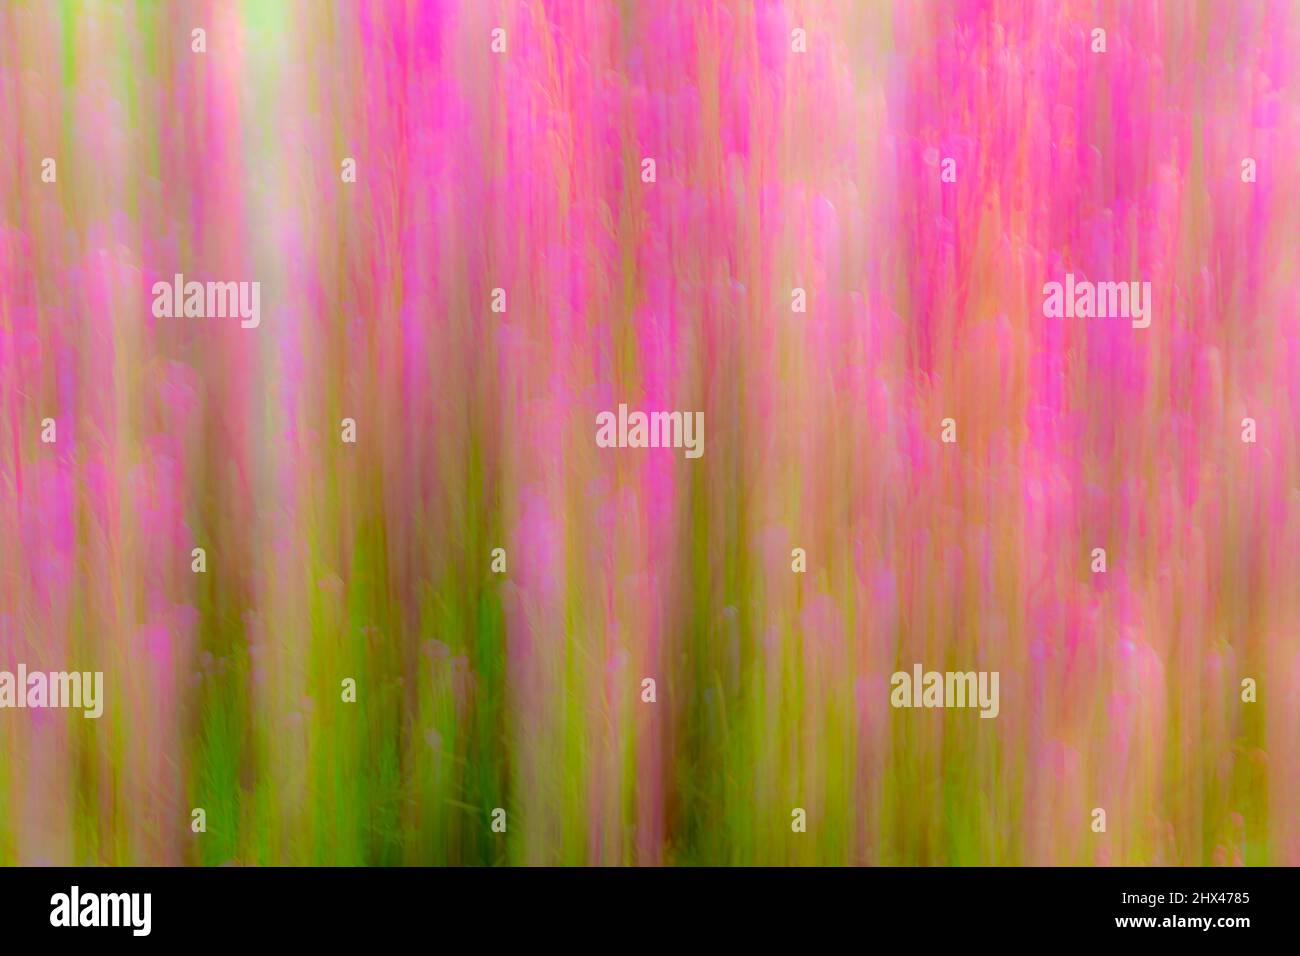 An intential camera movement abstract image of pink flowers against green foilage. Stock Photo